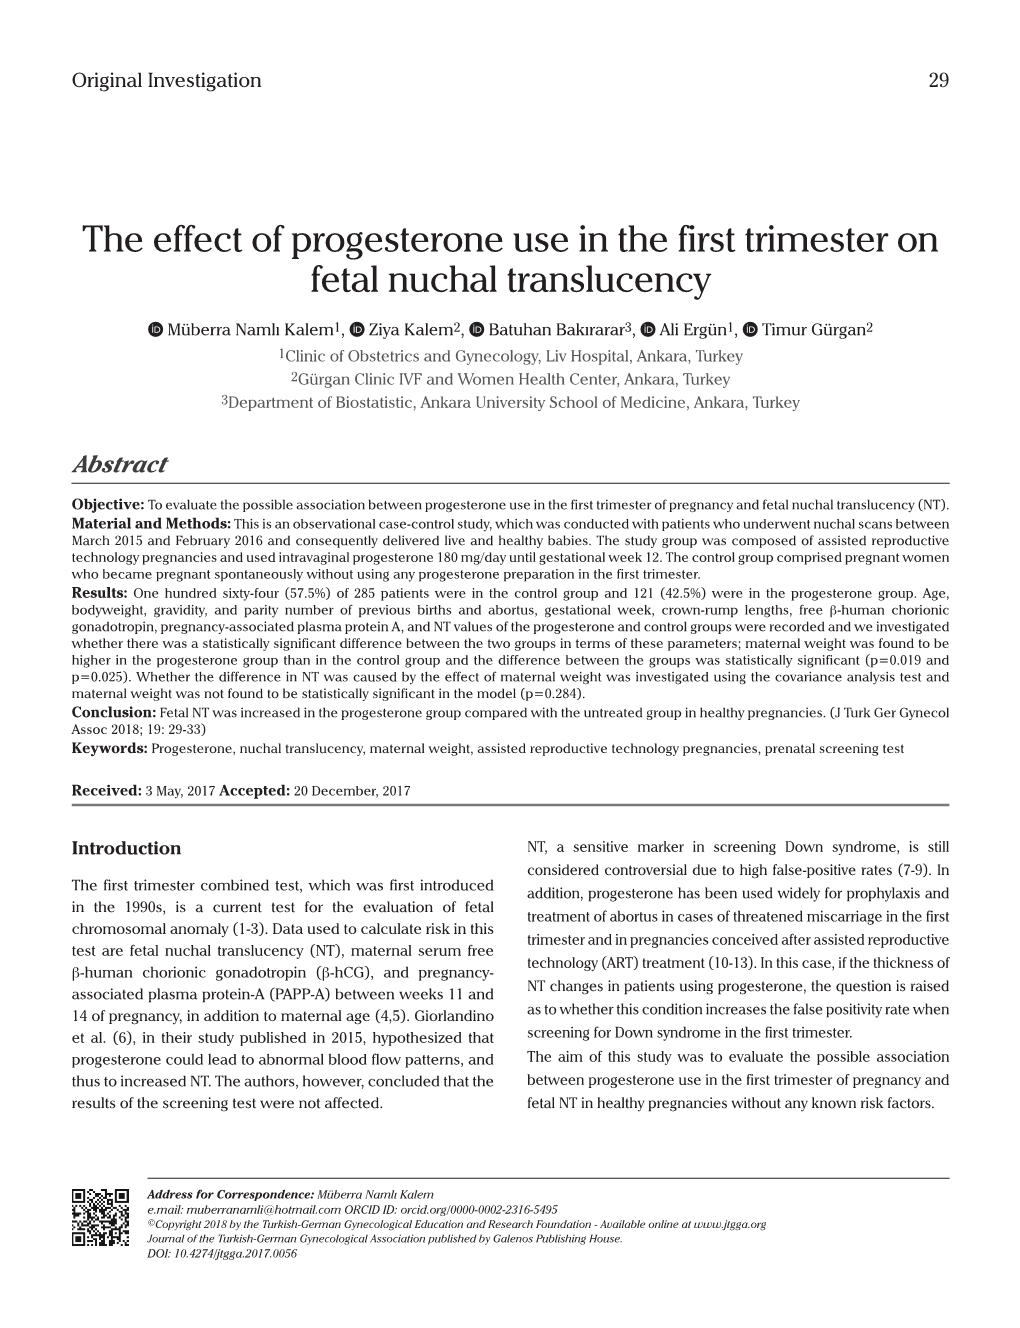 The Effect of Progesterone Use in the First Trimester on Fetal Nuchal Translucency